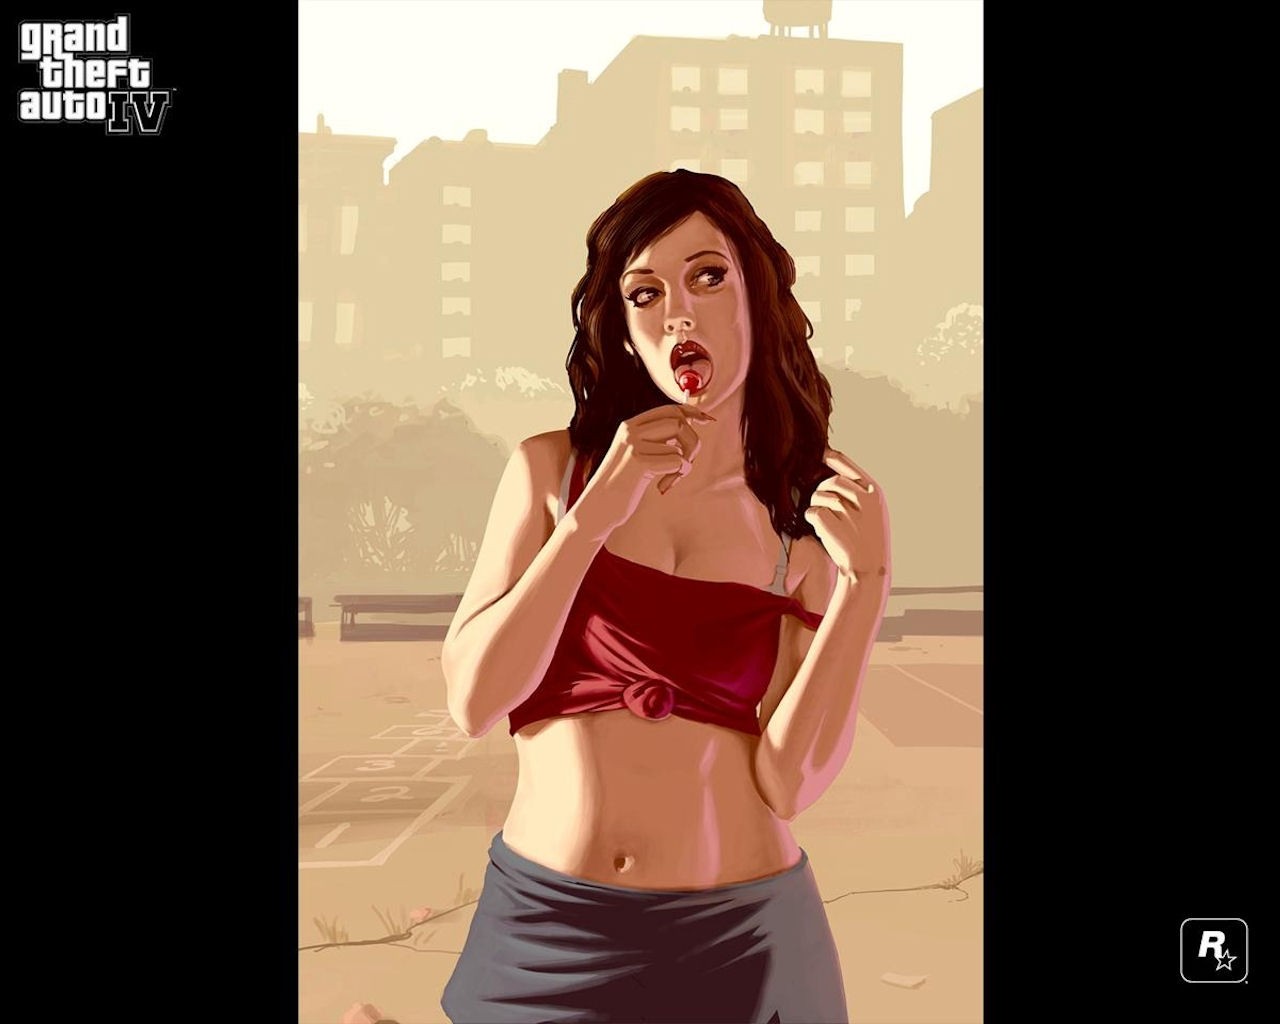 General 1280x1024 video games Grand Theft Auto IV PC gaming belly Rockstar Games lollipop video game art video game girls food sweets open mouth bare midriff standing looking away